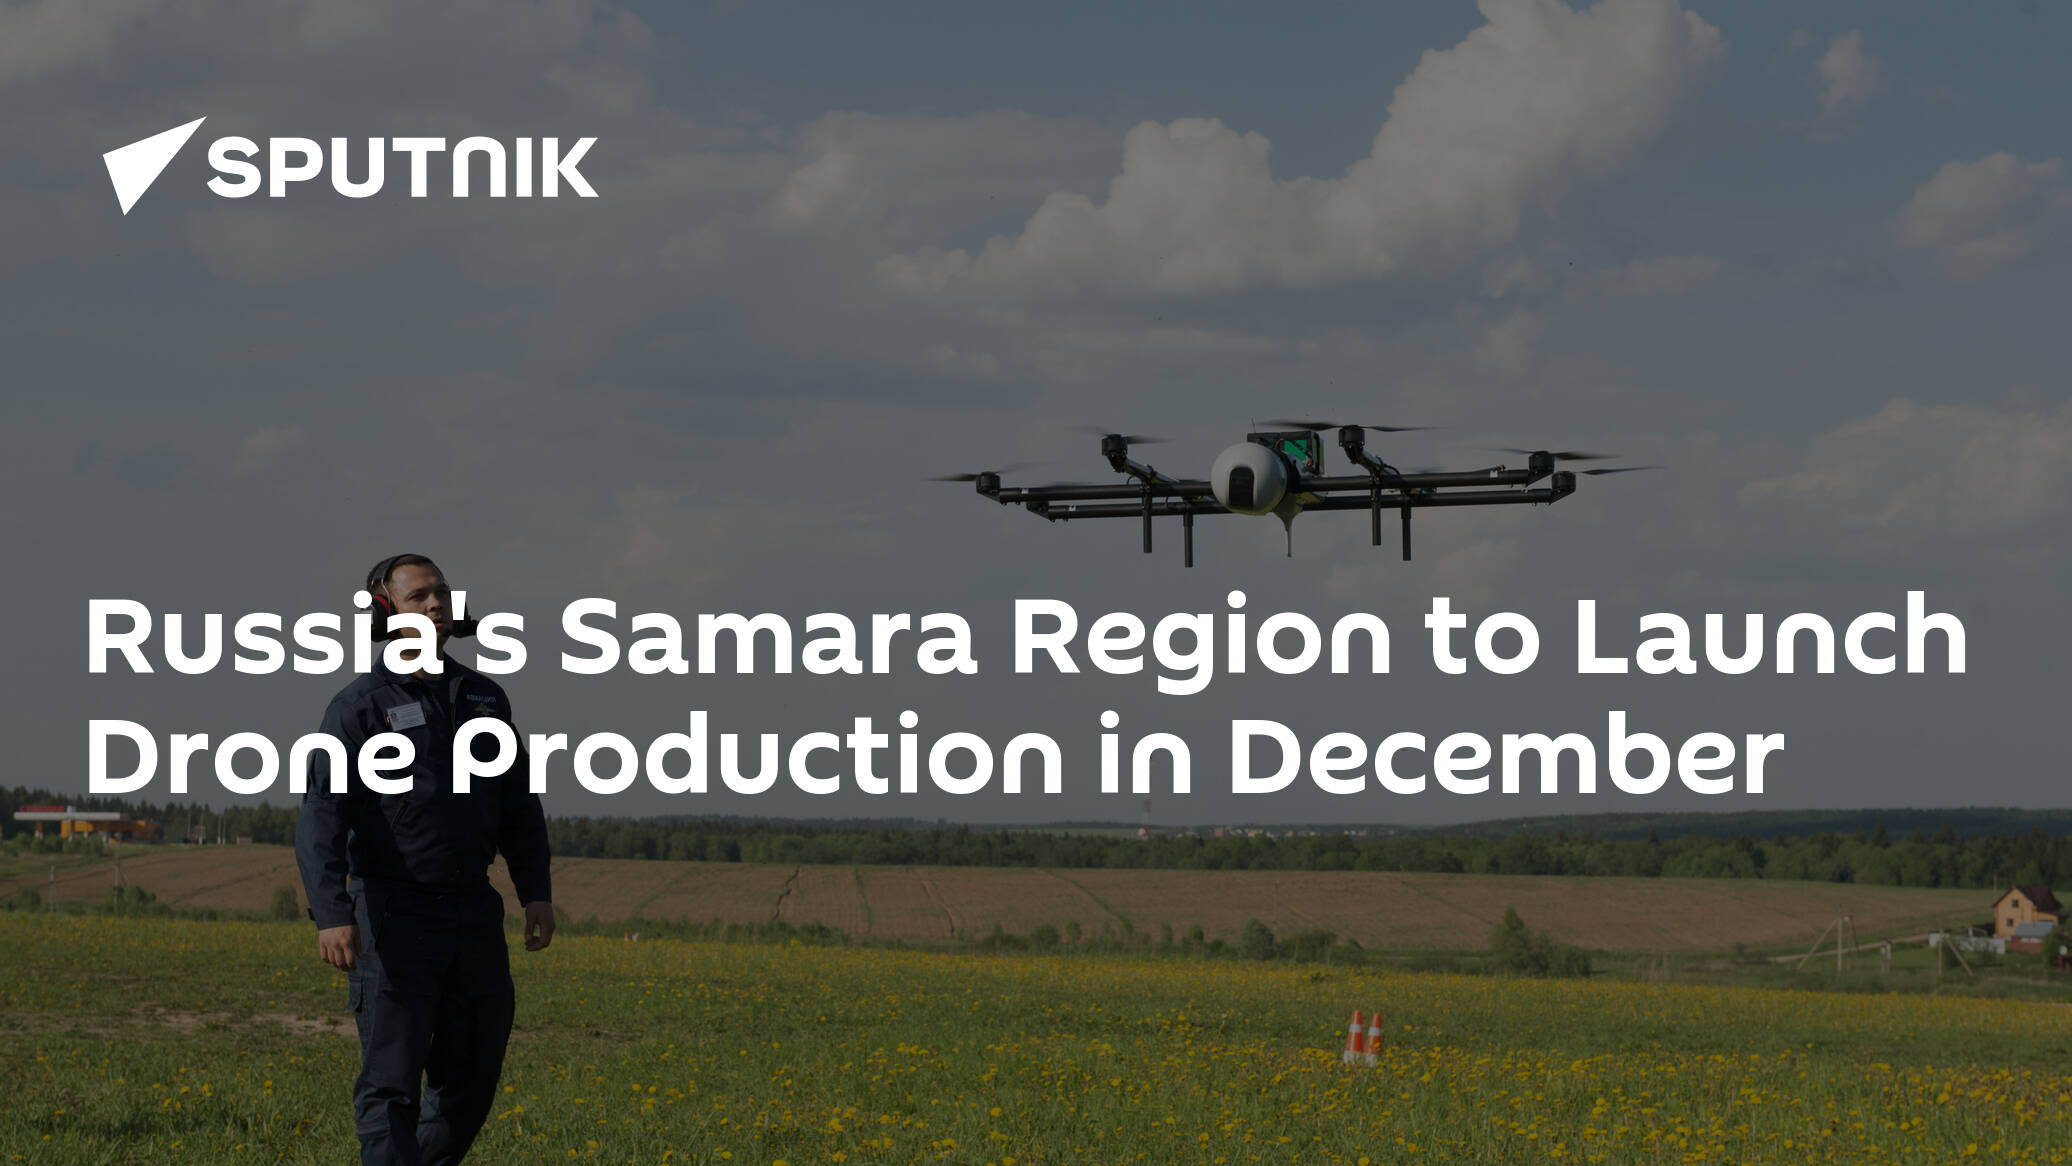 Russia's Samara Region to Launch Drone Production in December